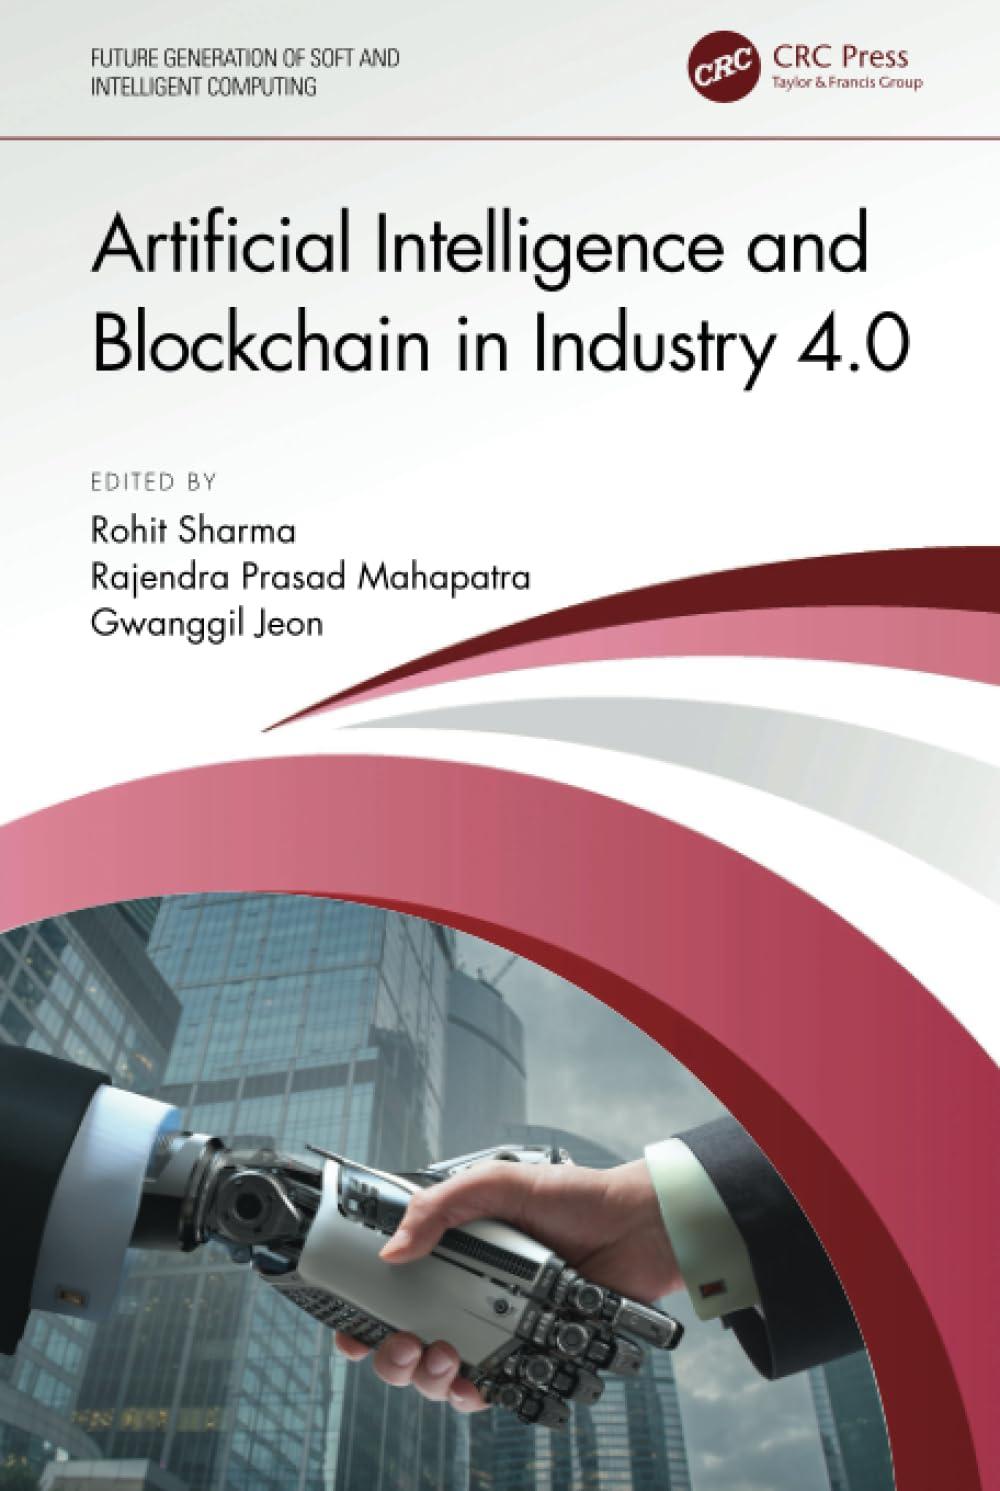 artificial intelligence and blockchain in industry 4.0 future generation of soft and intelligent computing